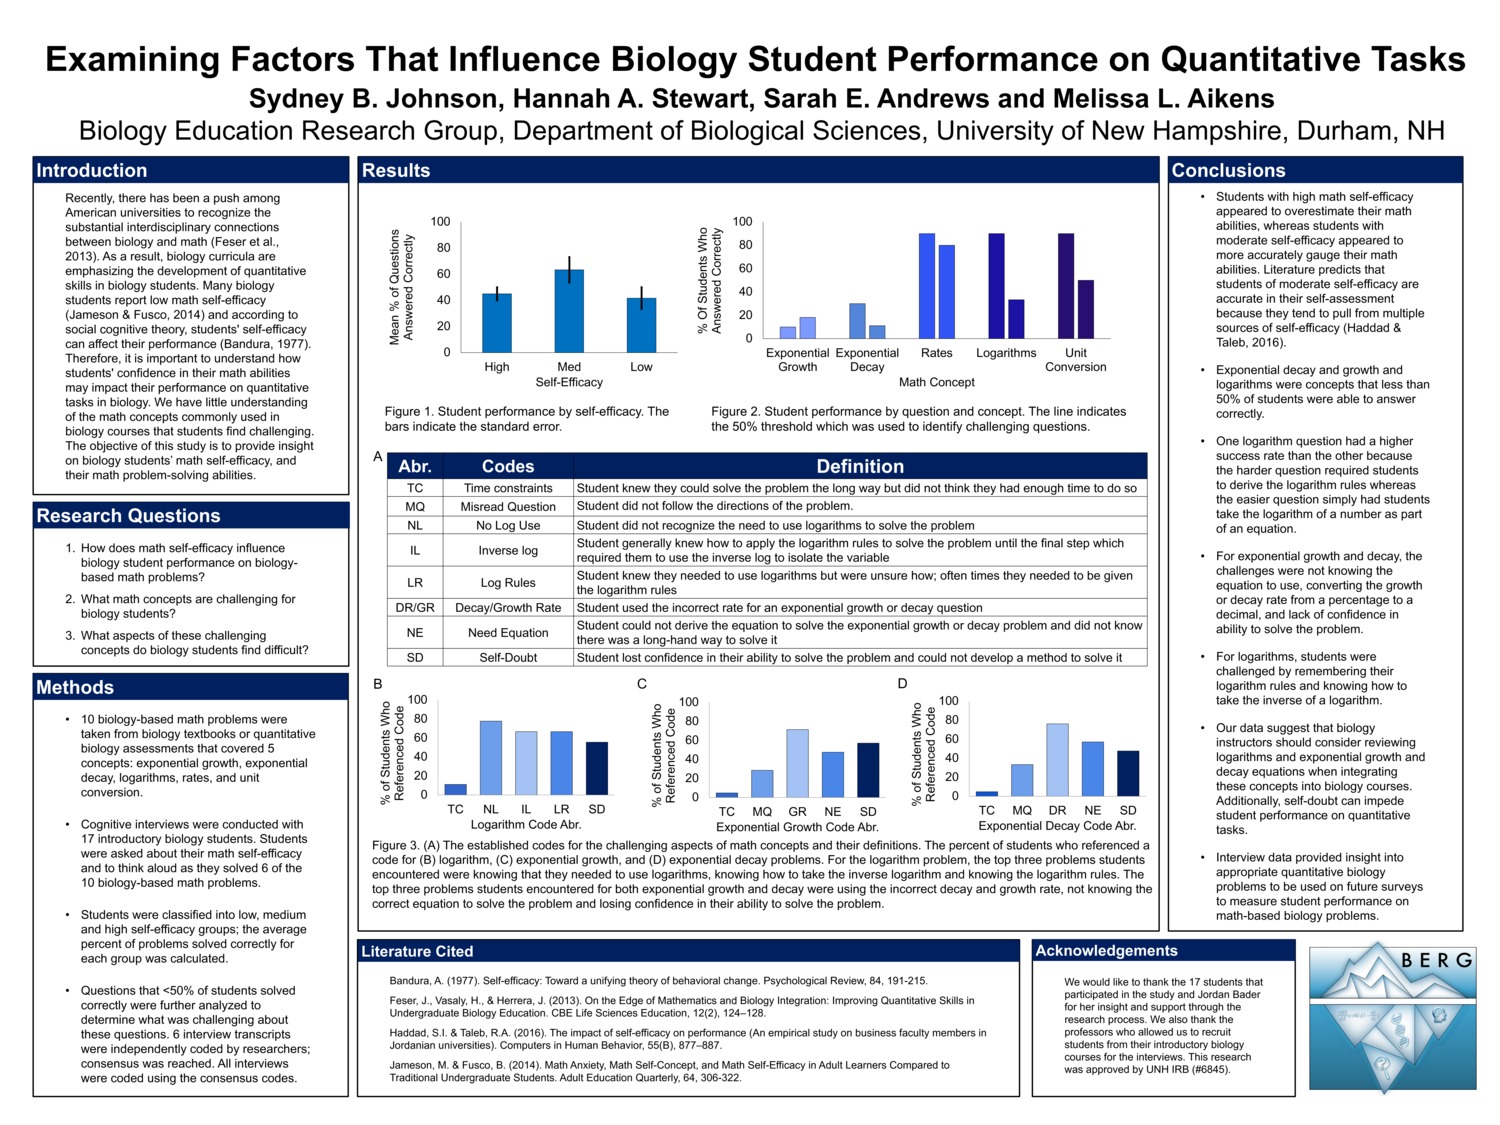 Examining Factors That Influence Biology Student Performance On Quantitative Tasks by mla1011